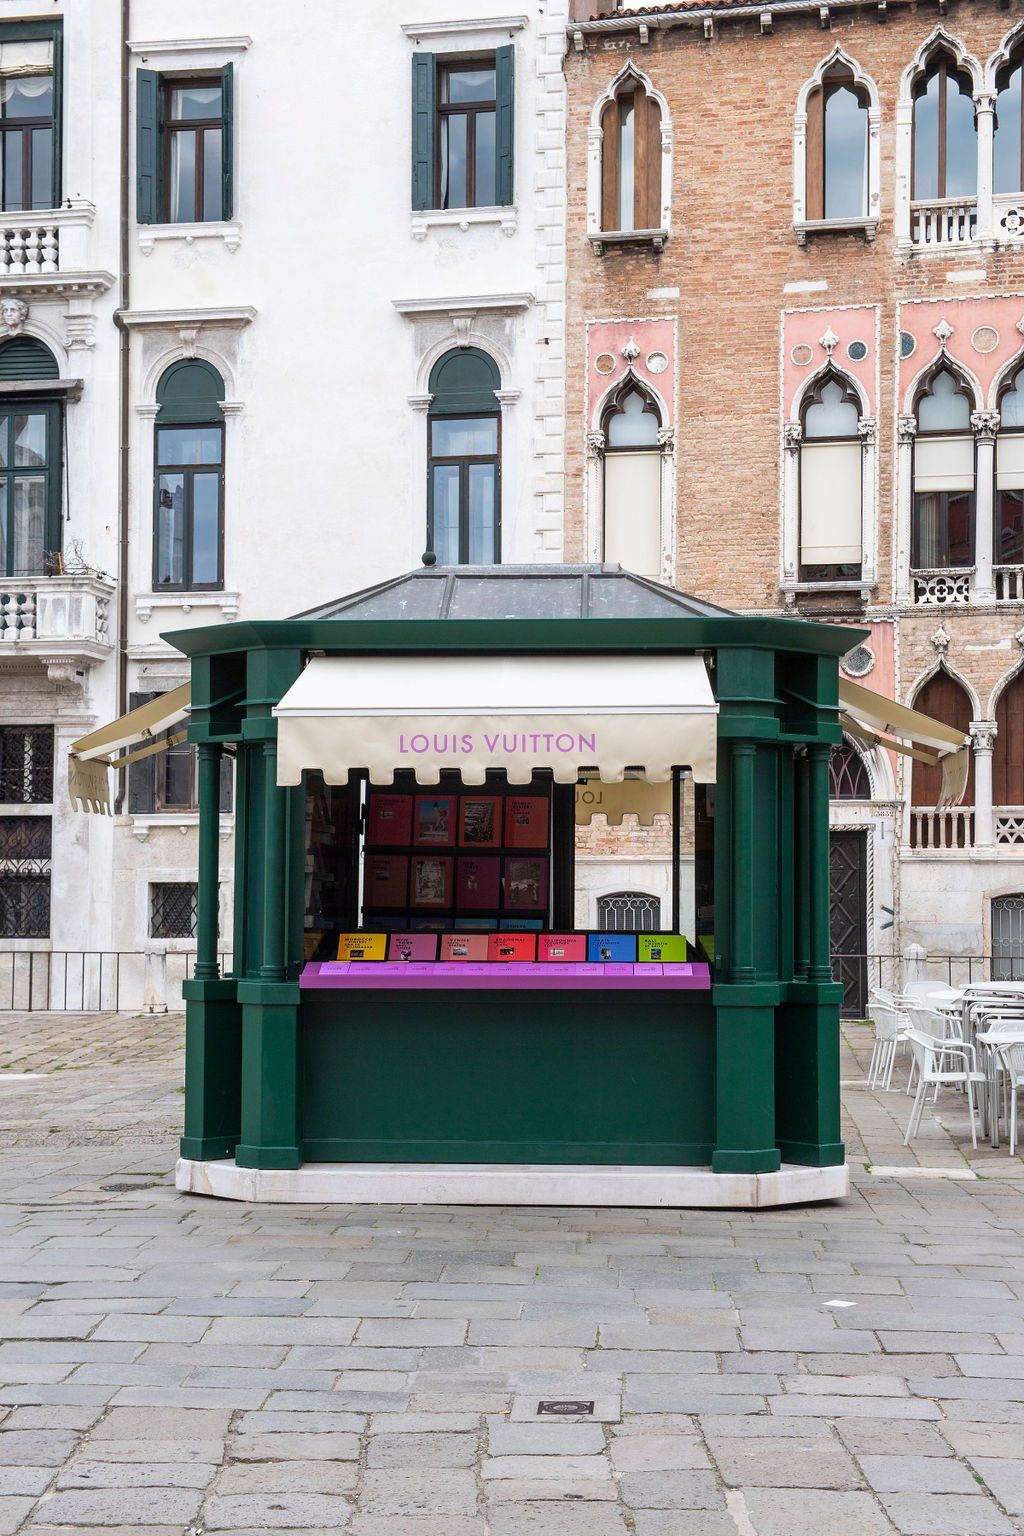 Venice Has a New Art Patron and His Name Is Louis Vuitton